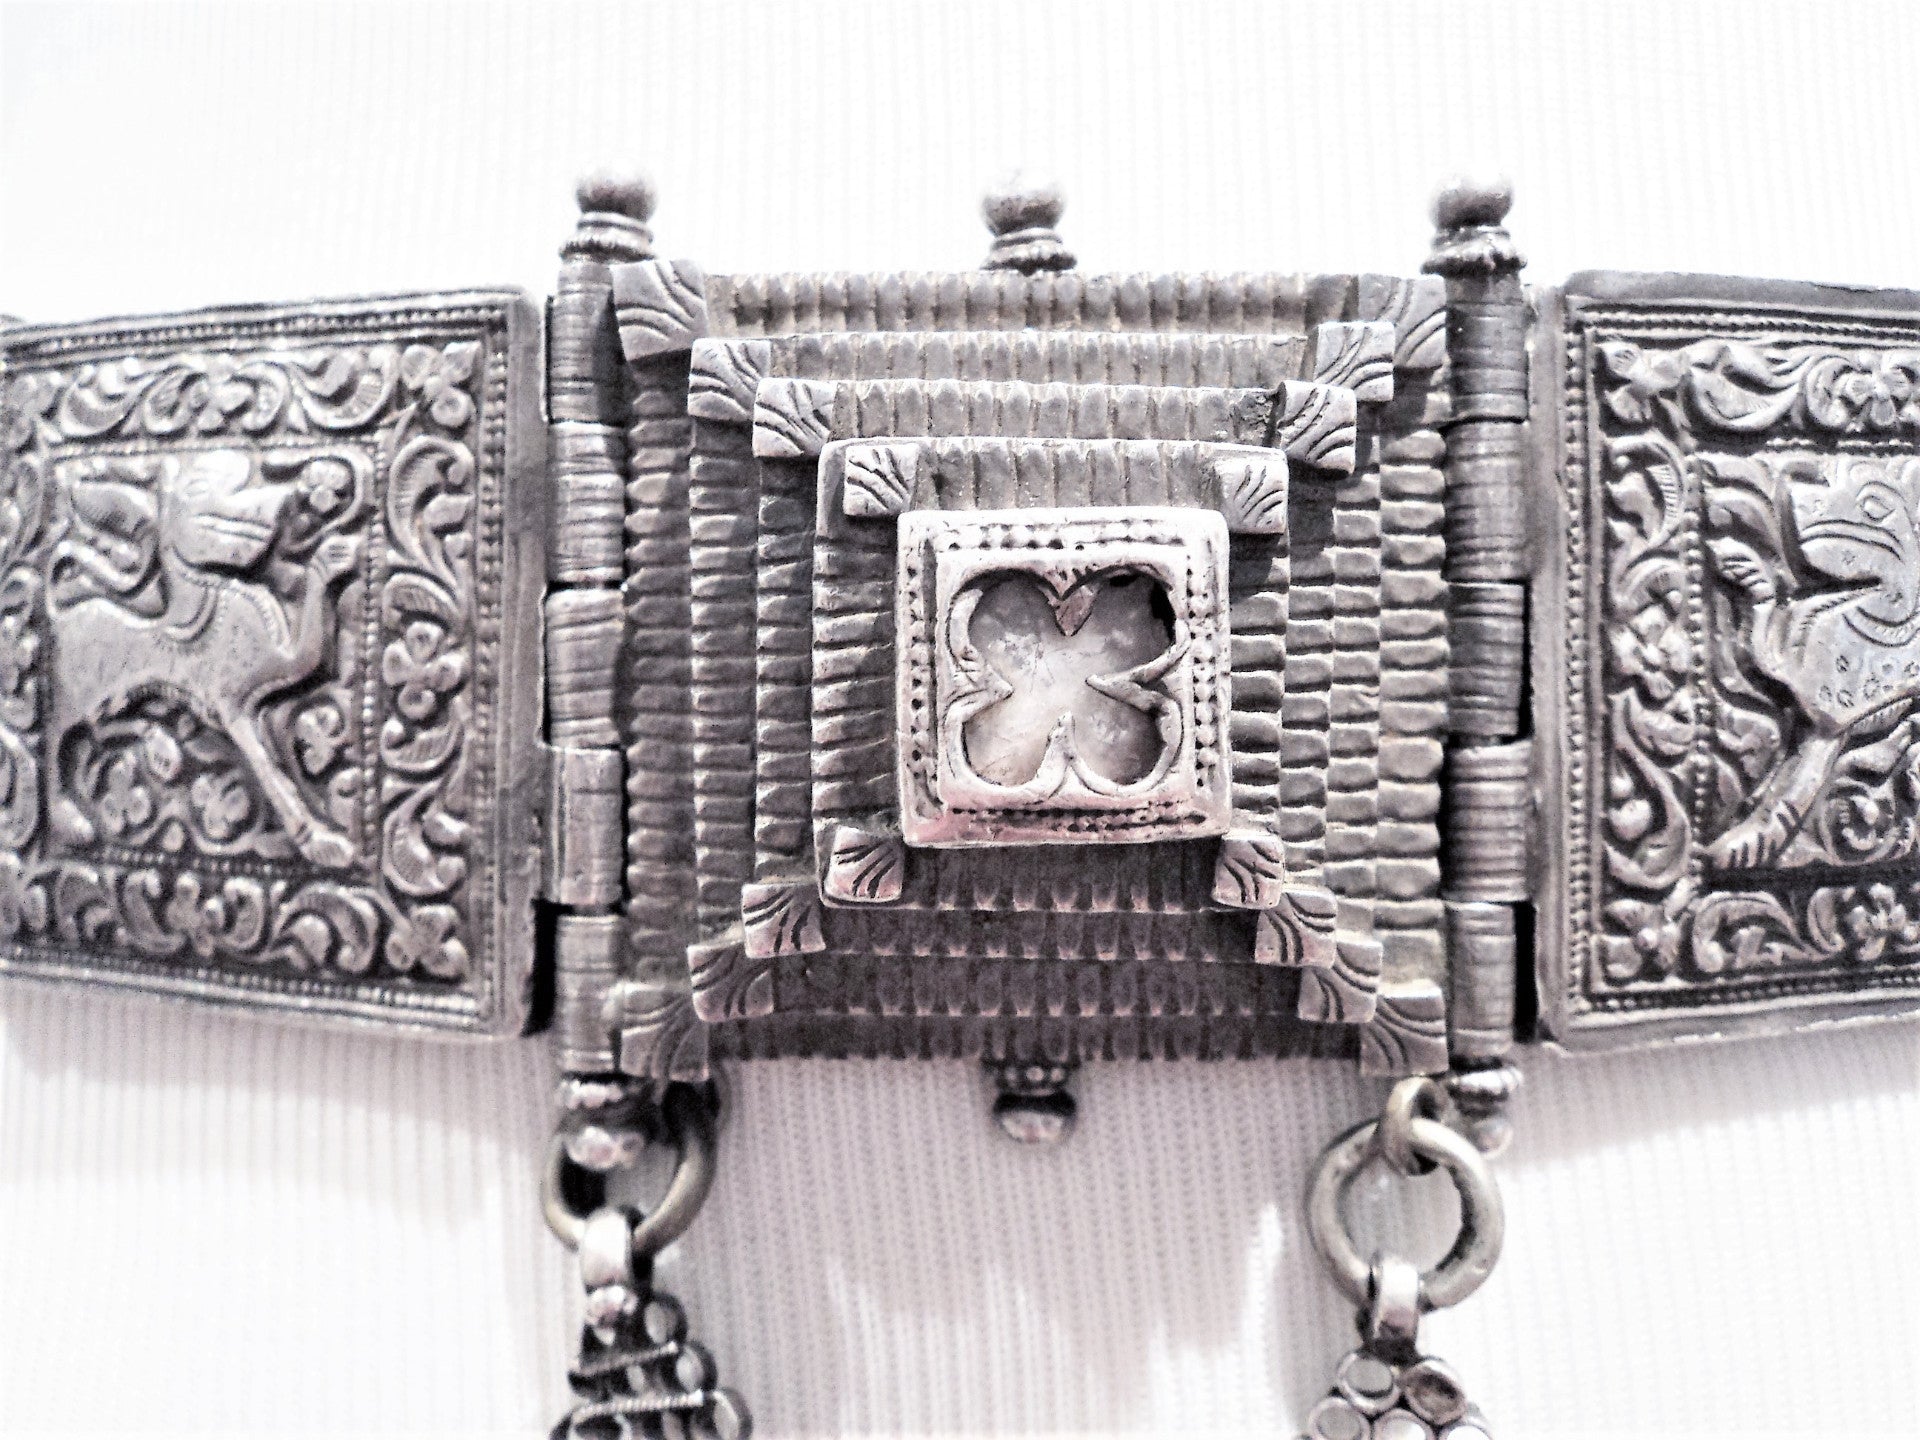 Antique Old Silver Arapatti Indian Tribal Belt